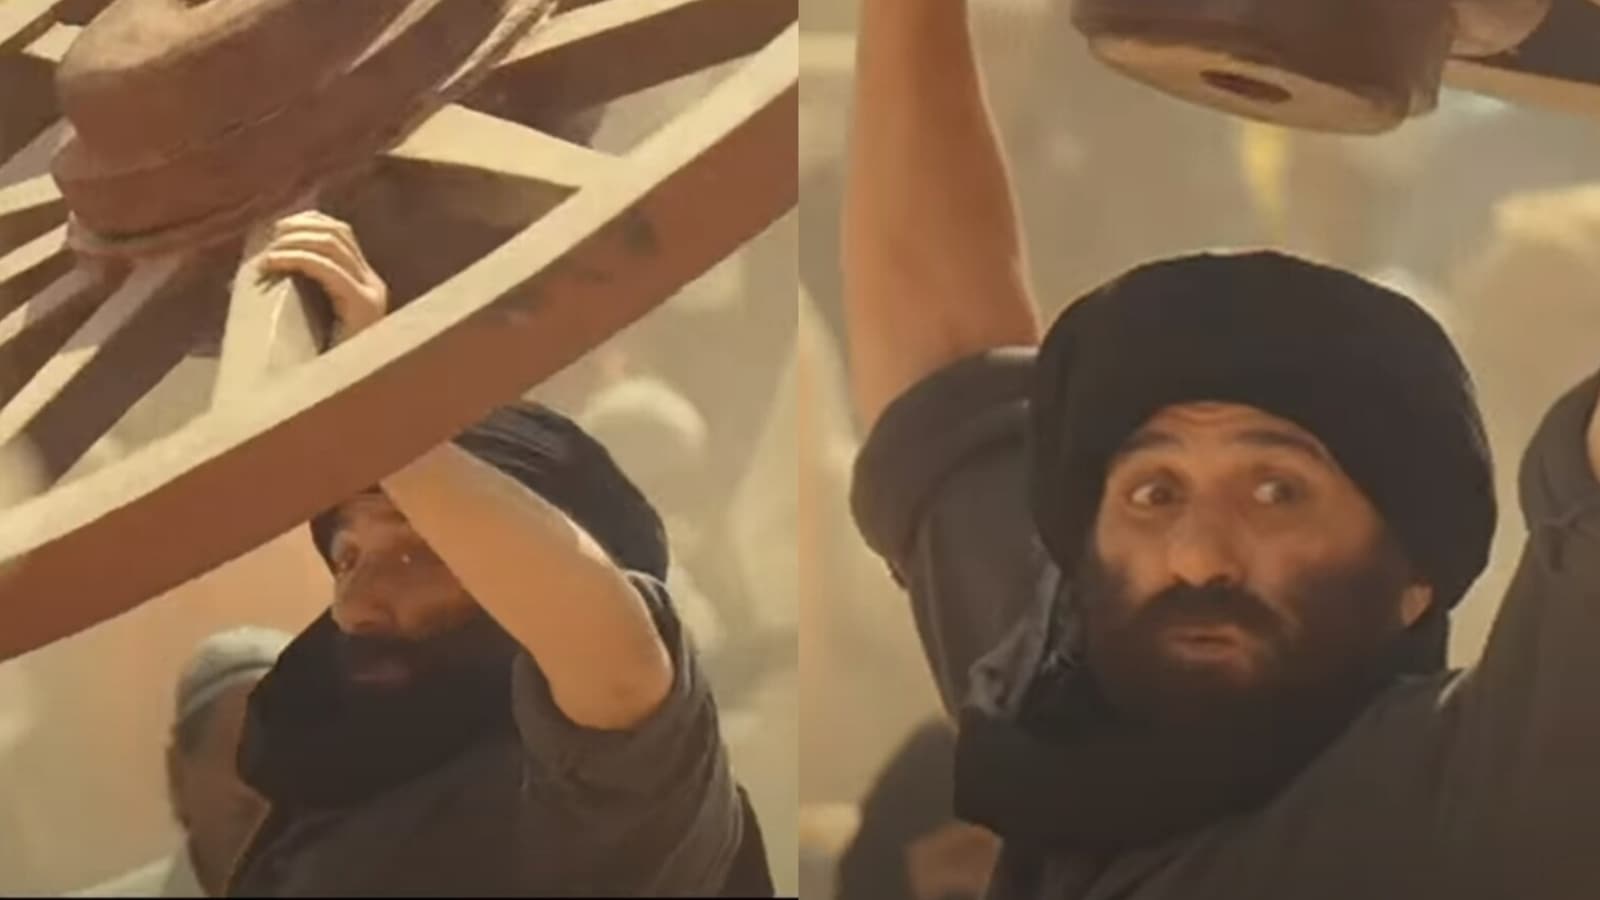 Sunny Deol lifts a cartwheel in his first look from Gadar 2, thrilled fans call it a goosebumps moment. Watch